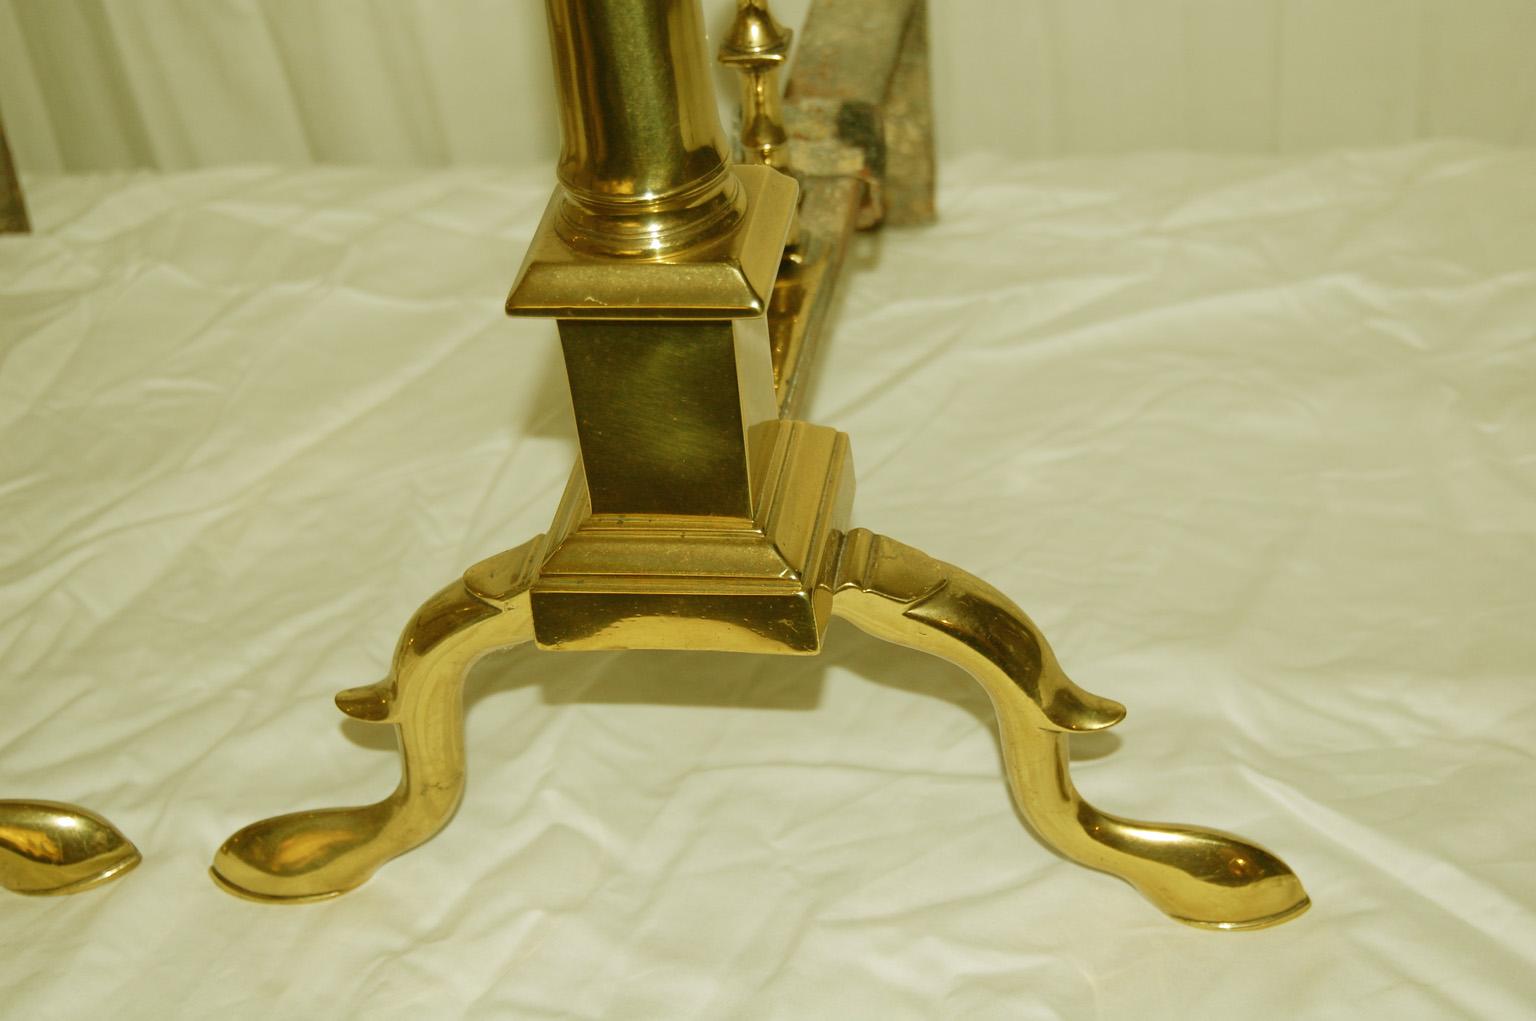 18th Century American Federal Brass Lemon Top Andirons with Cabriole Legs and Slipper Feet For Sale